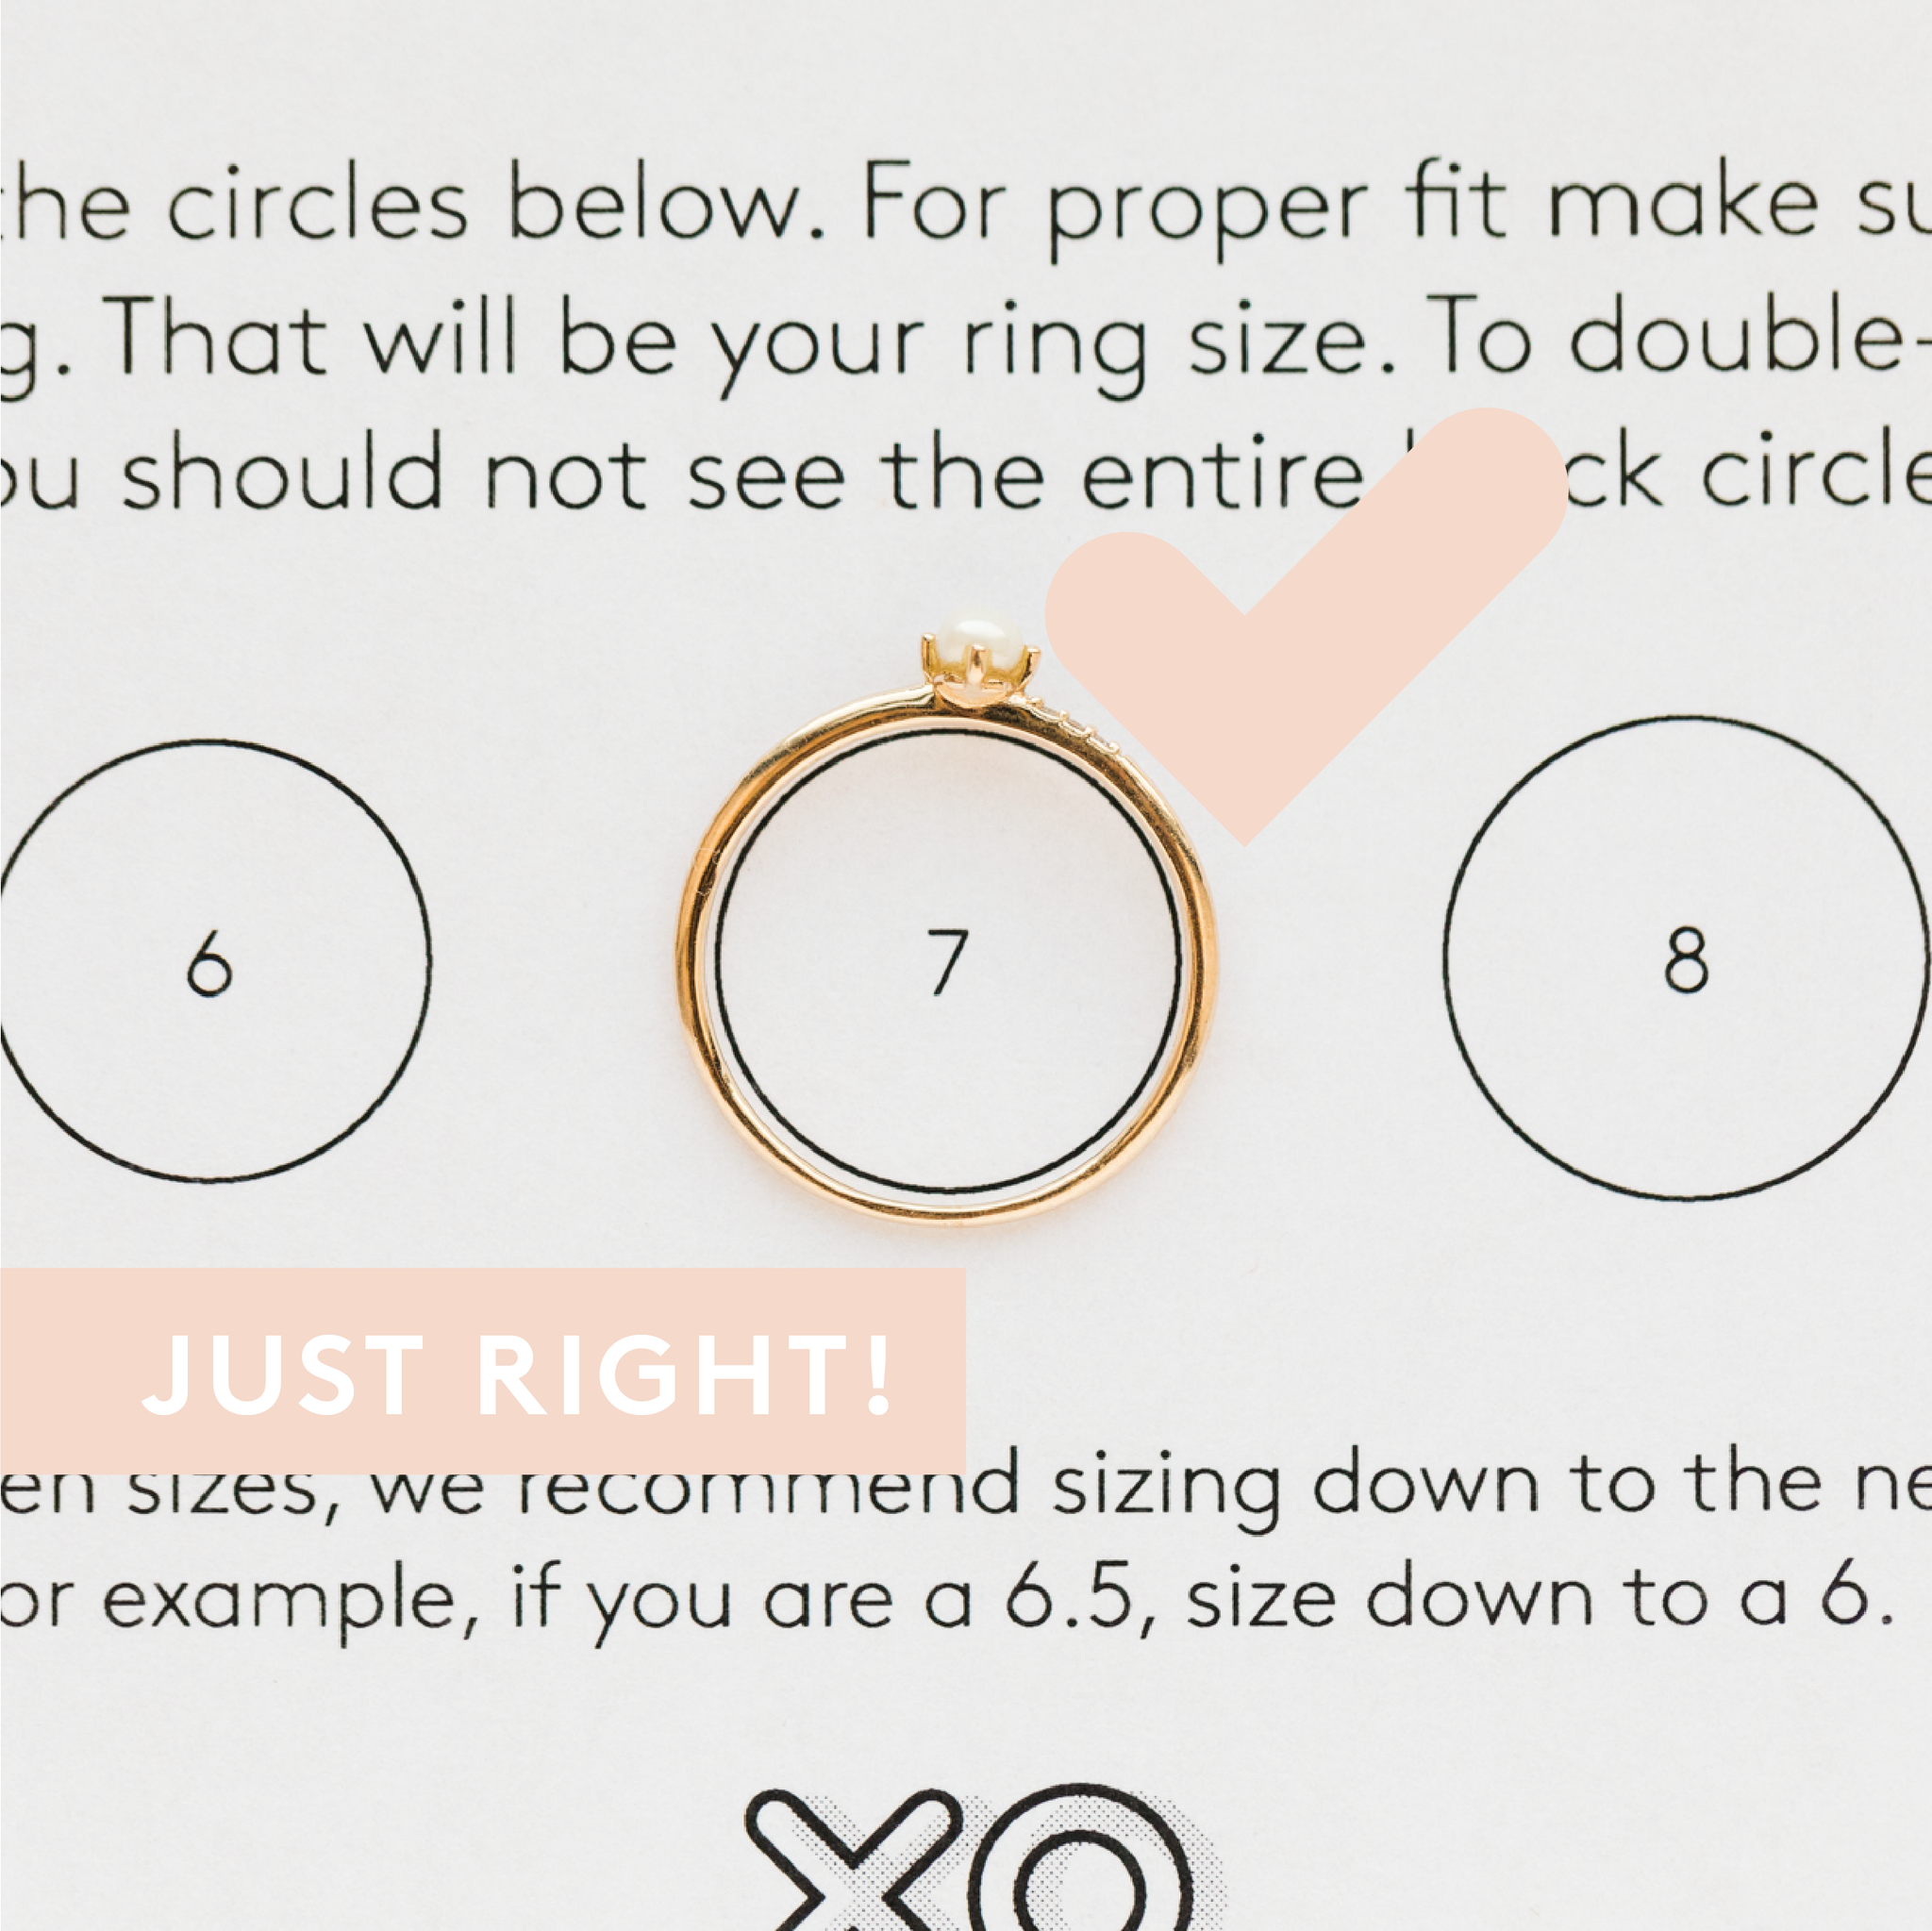 Ring Size Chart For Women Printable